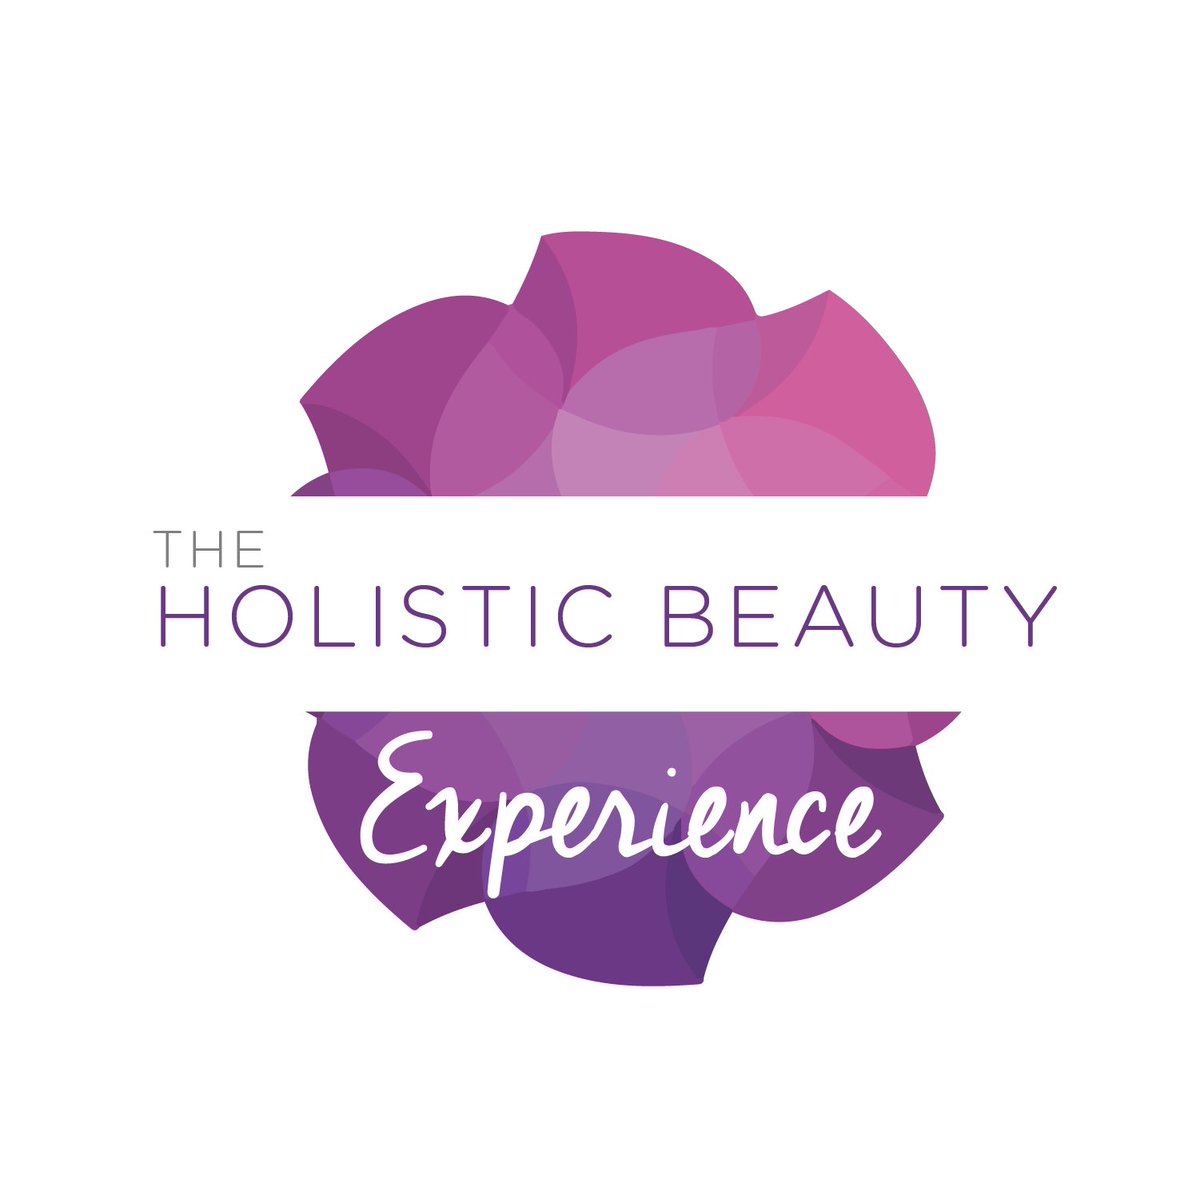 How sexually intelligent are you?
Find out on May 31st at The Holistic Beauty Experience with Gabriela Arredondo from @EvolveHolistic_ 

Do you have your ticket yet? theholisticbeautyexperience.com/shop

#holisticskincare #skincare #selfcare #selflove #canadianmade #torontoevents